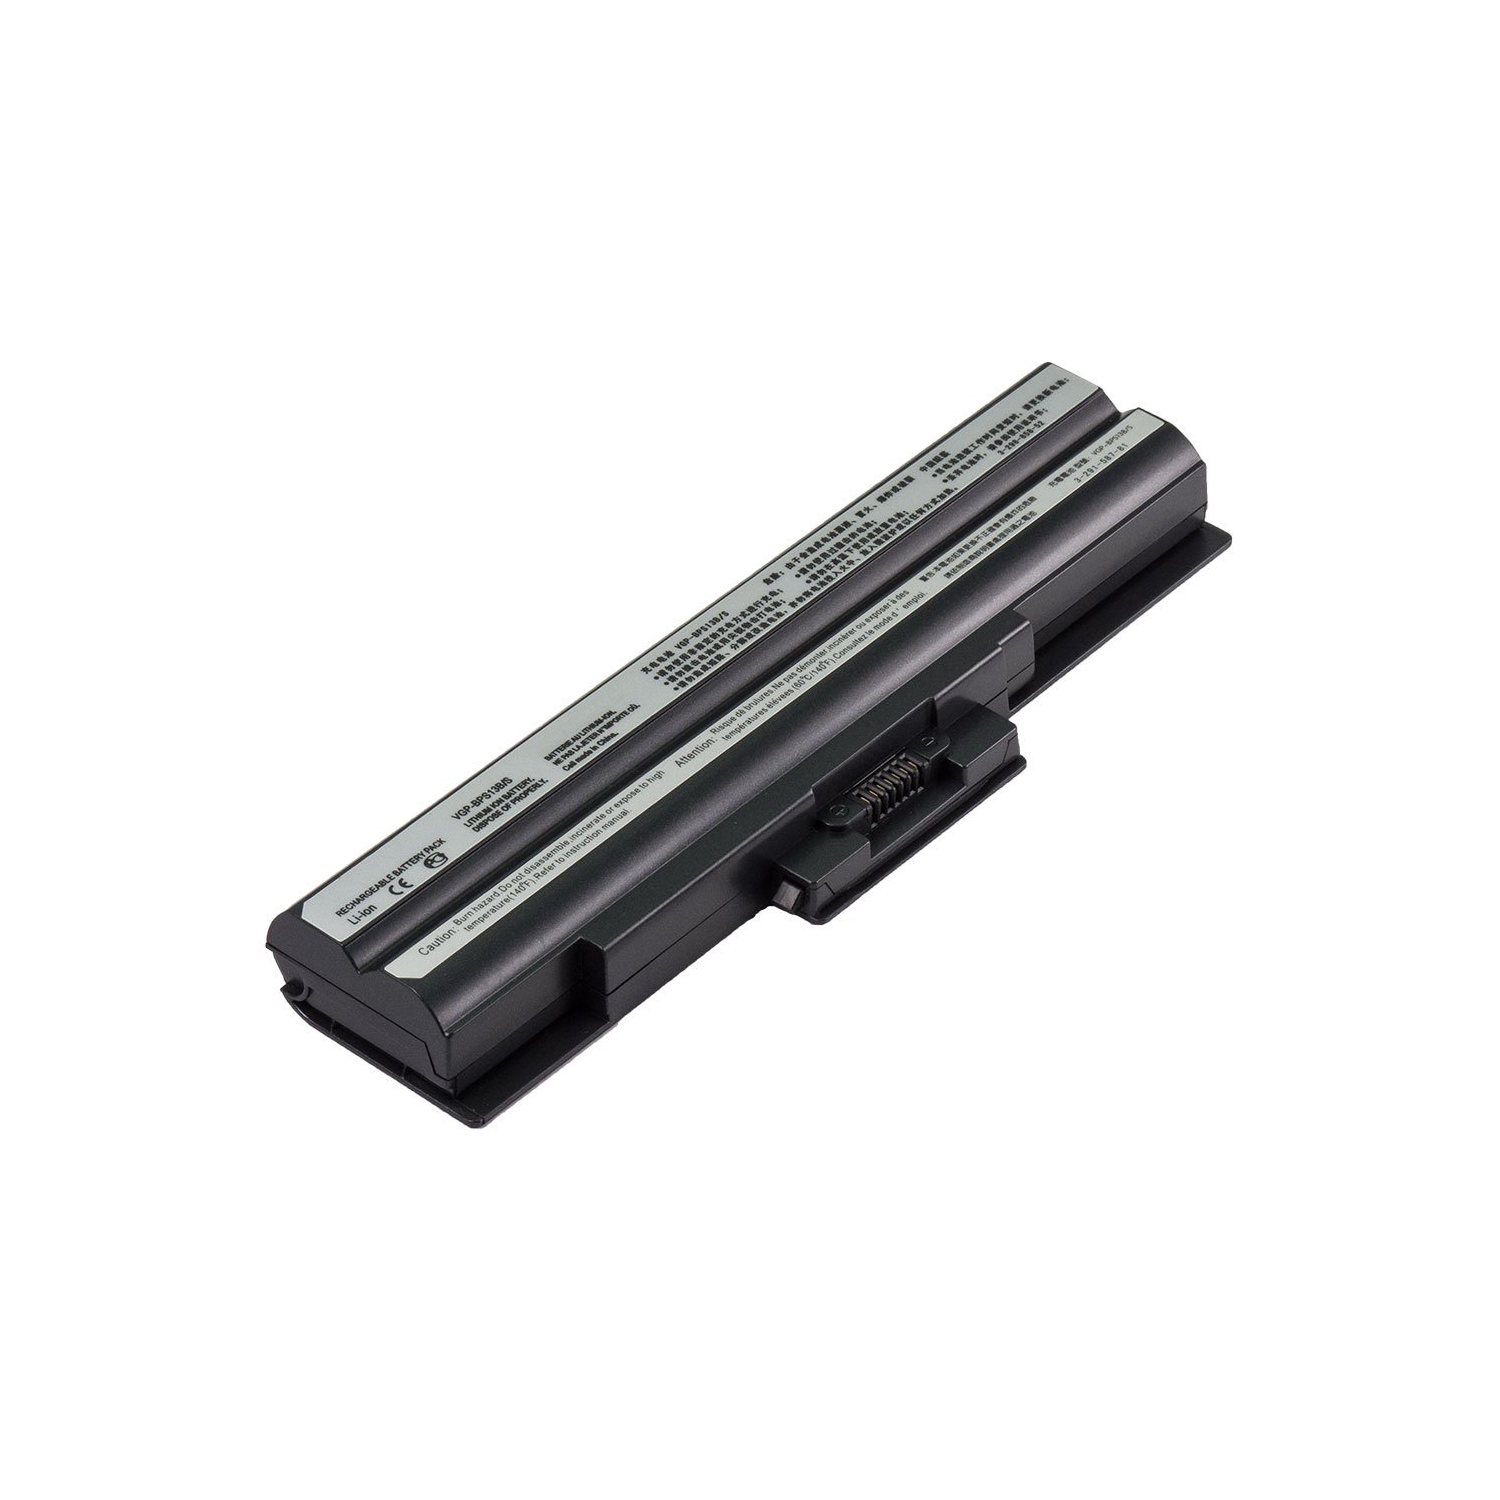 Laptop Battery Replacement for Sony VAIO VGN-FW246J, VGP-BPS13, VGP-BPS13/S, VGP-BPS13A/Q, VGP-BPS13B/B, VGP-BSP13/S